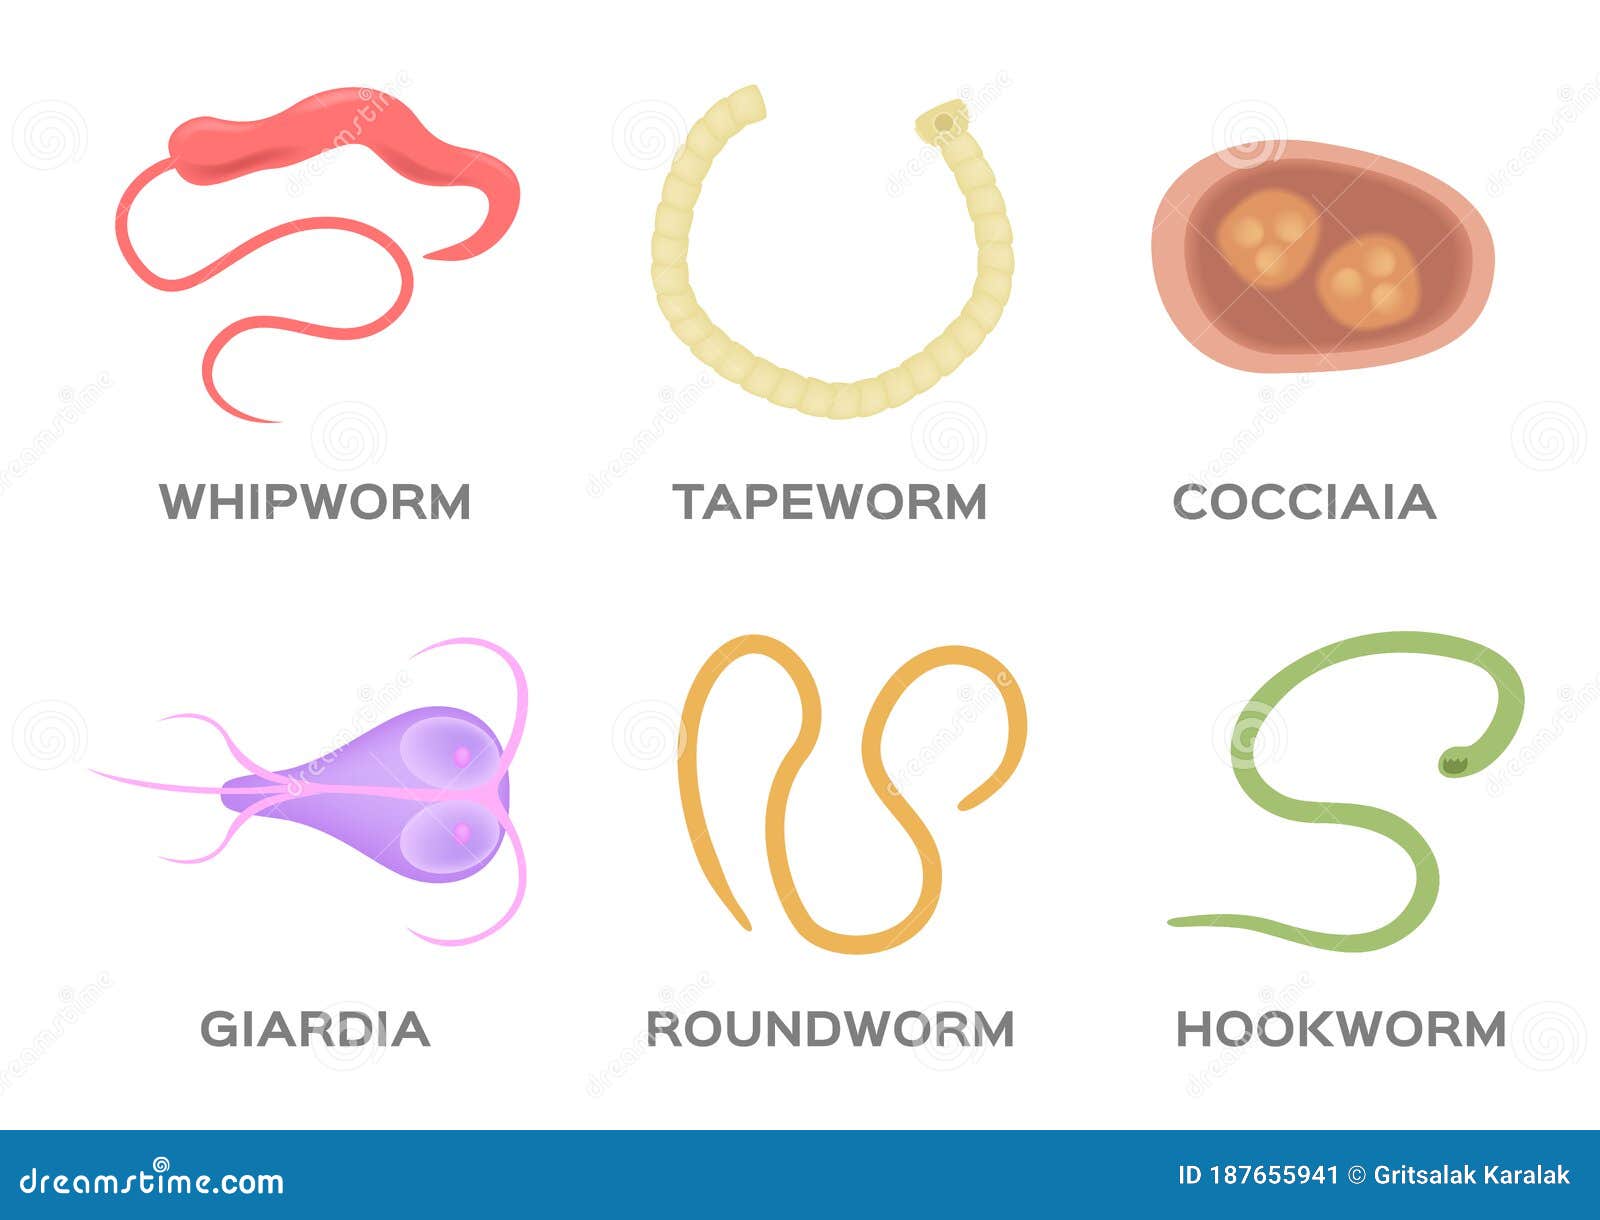 Over The Counter Worm Medicine For Humans - Parasitic intestinal worms key points